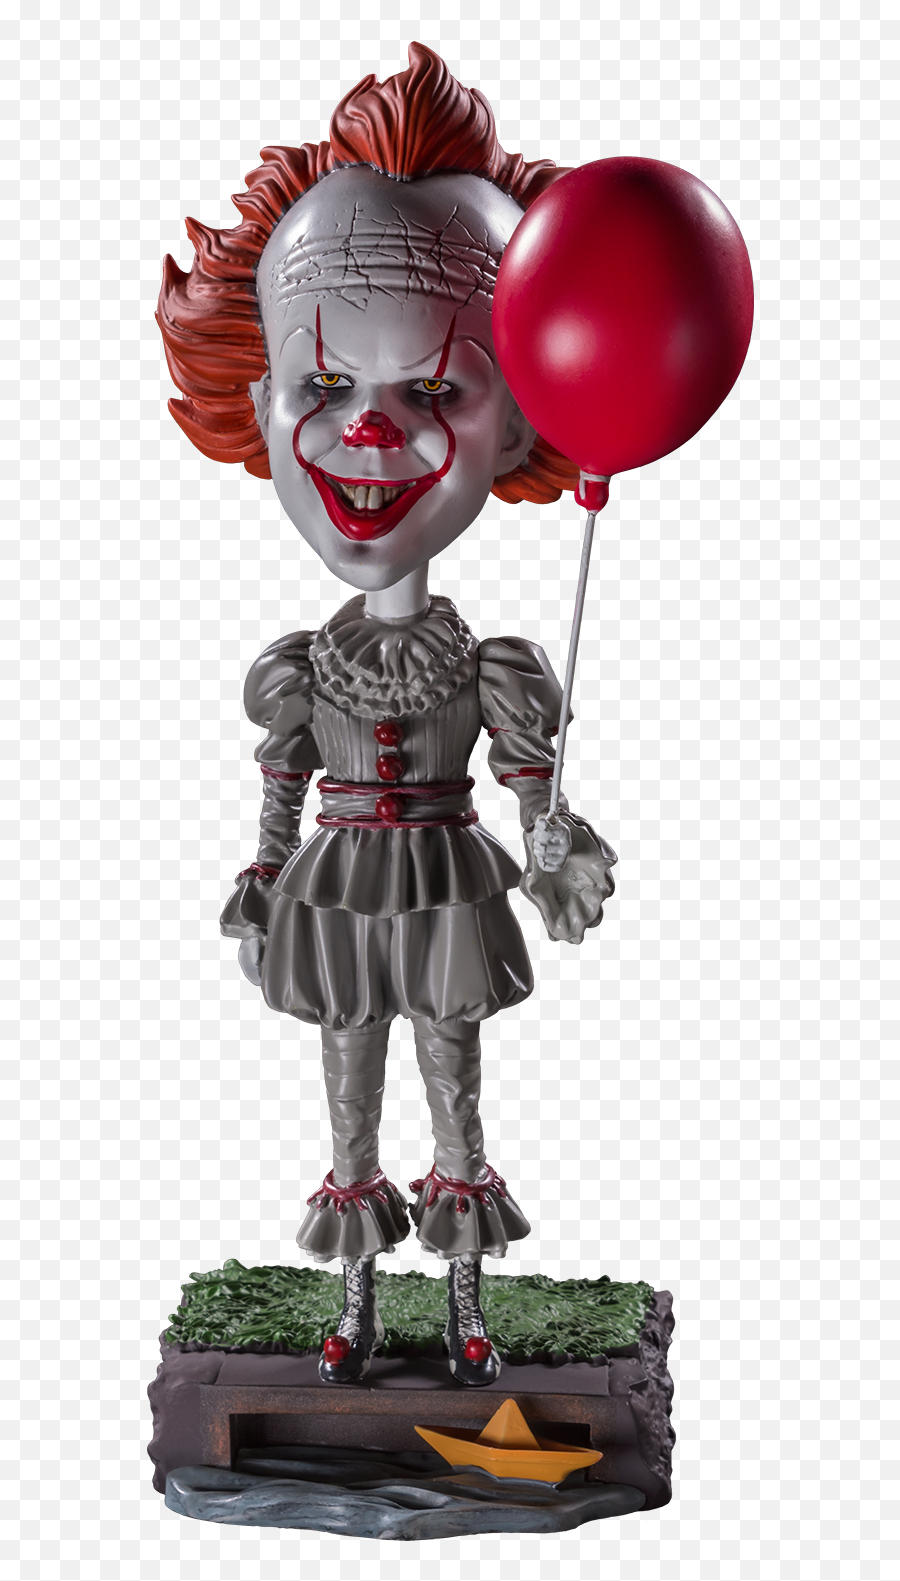 Download It - Pennywise Bobblehead Png Image With No Neca Head Knocker Pennywise,Pennywise Png